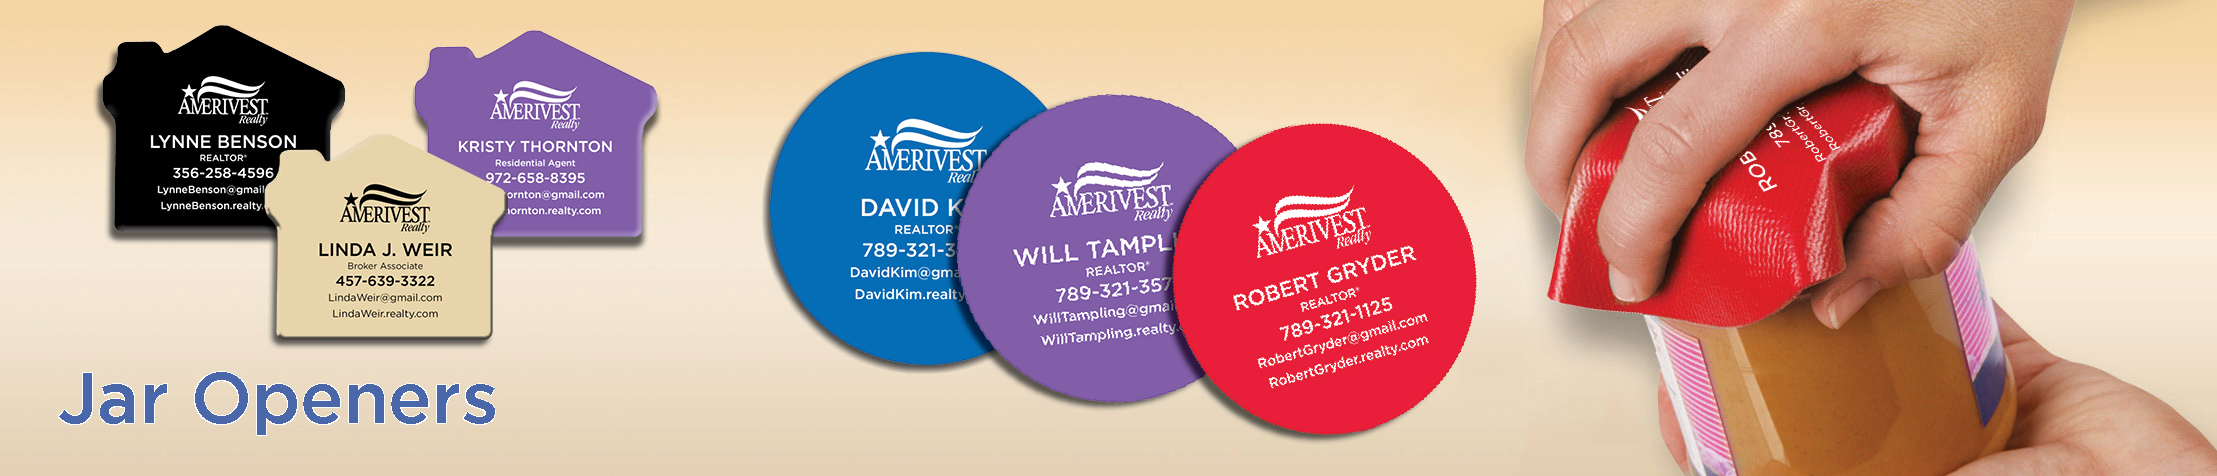 Amerivest Realty Real Estate Jar Openers - Amerivest Realty  personalized realtor promotional products | BestPrintBuy.com